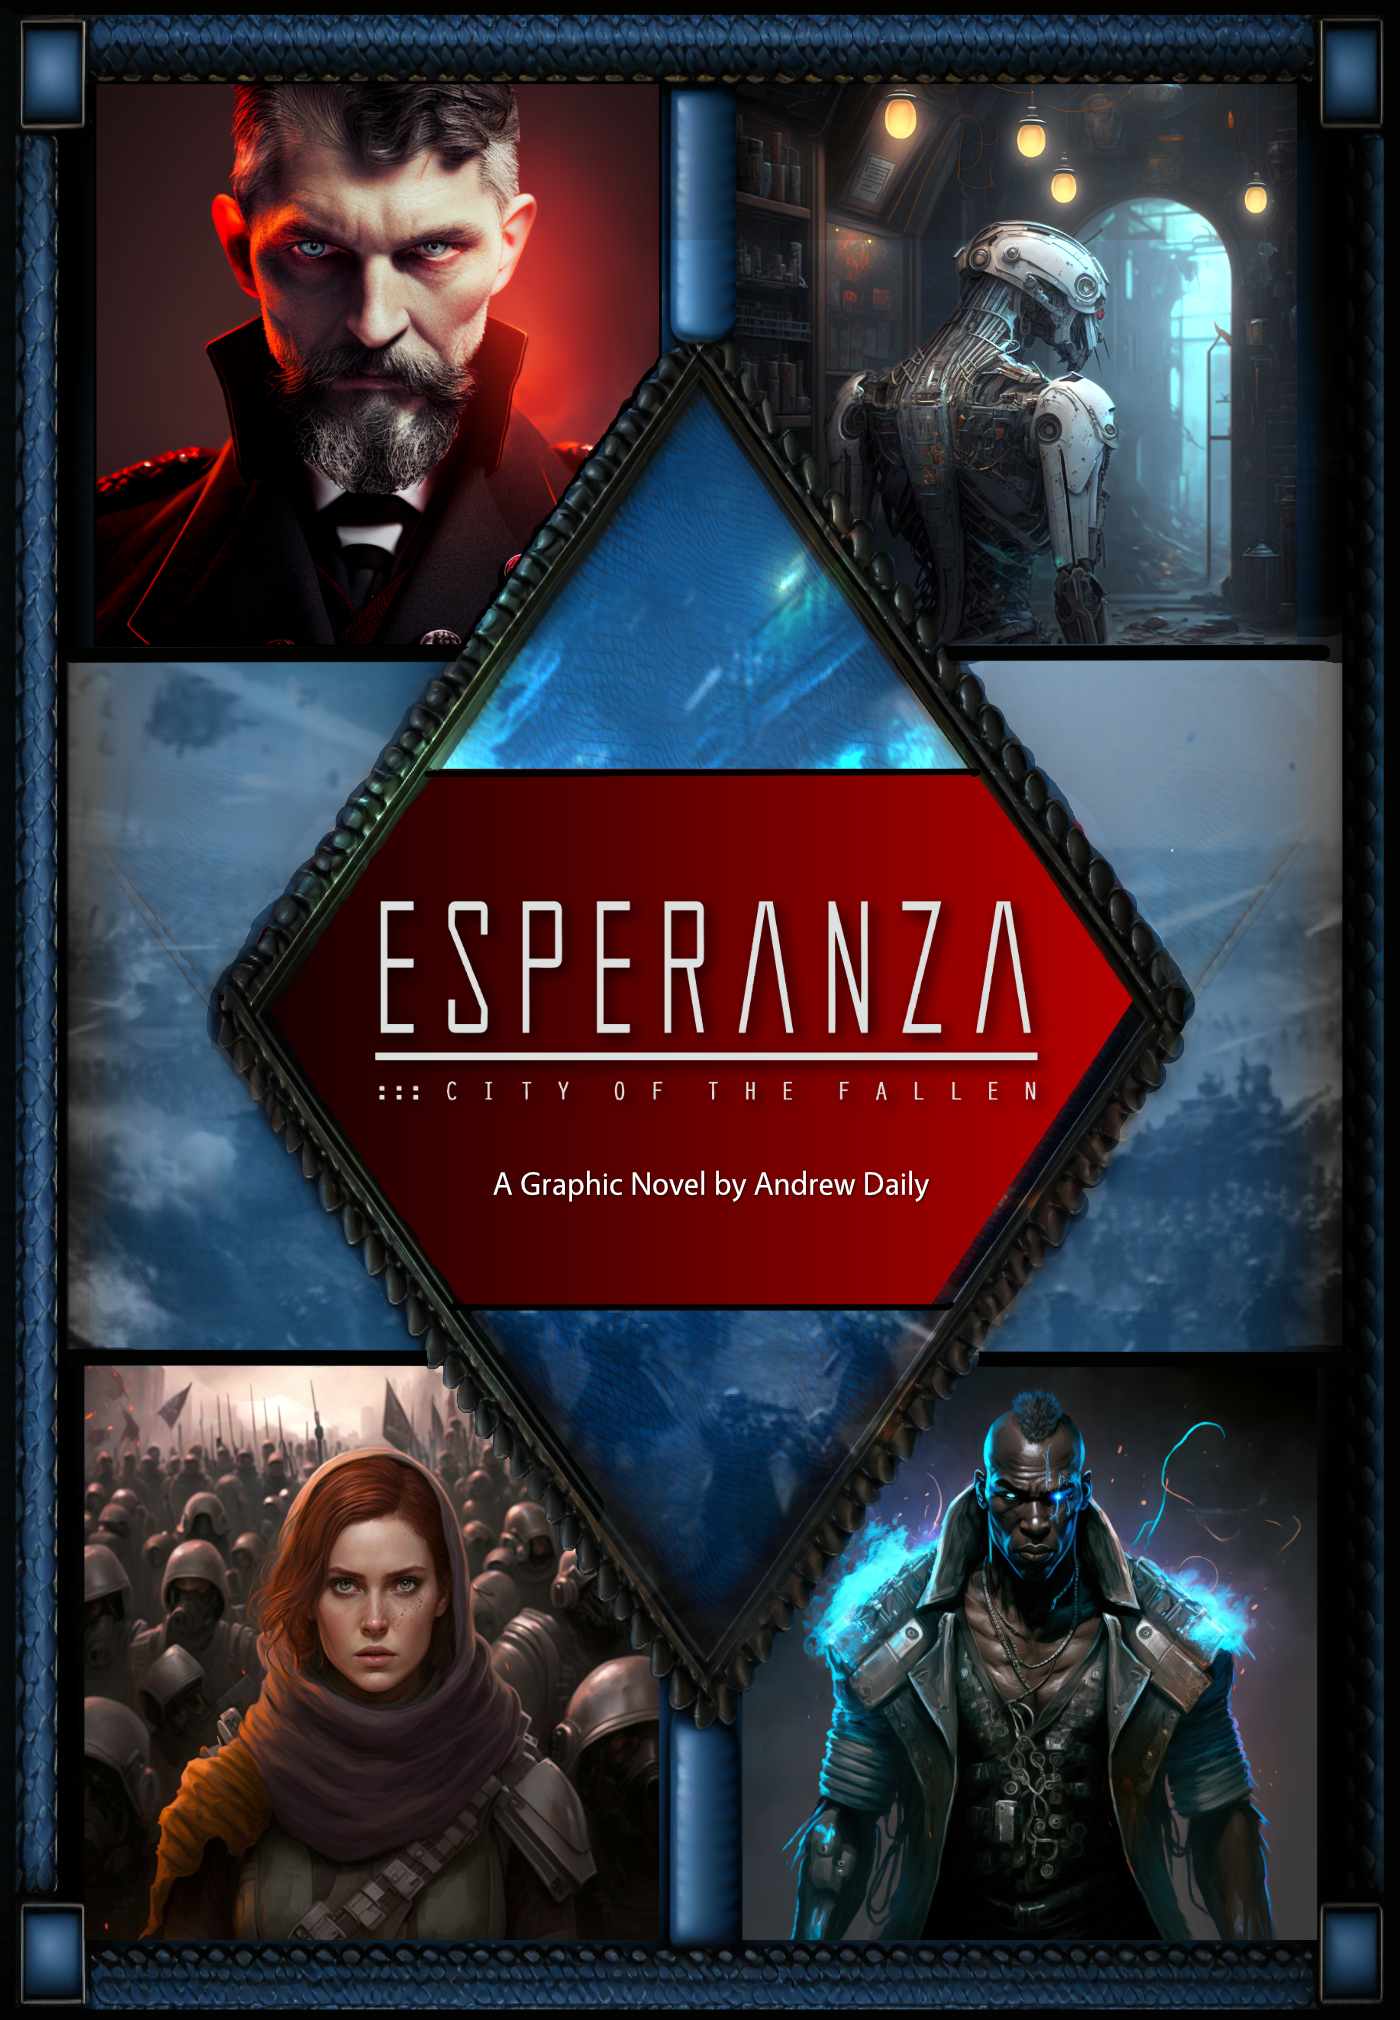 Esperanza: The Graphic Novel by Andrew Daily